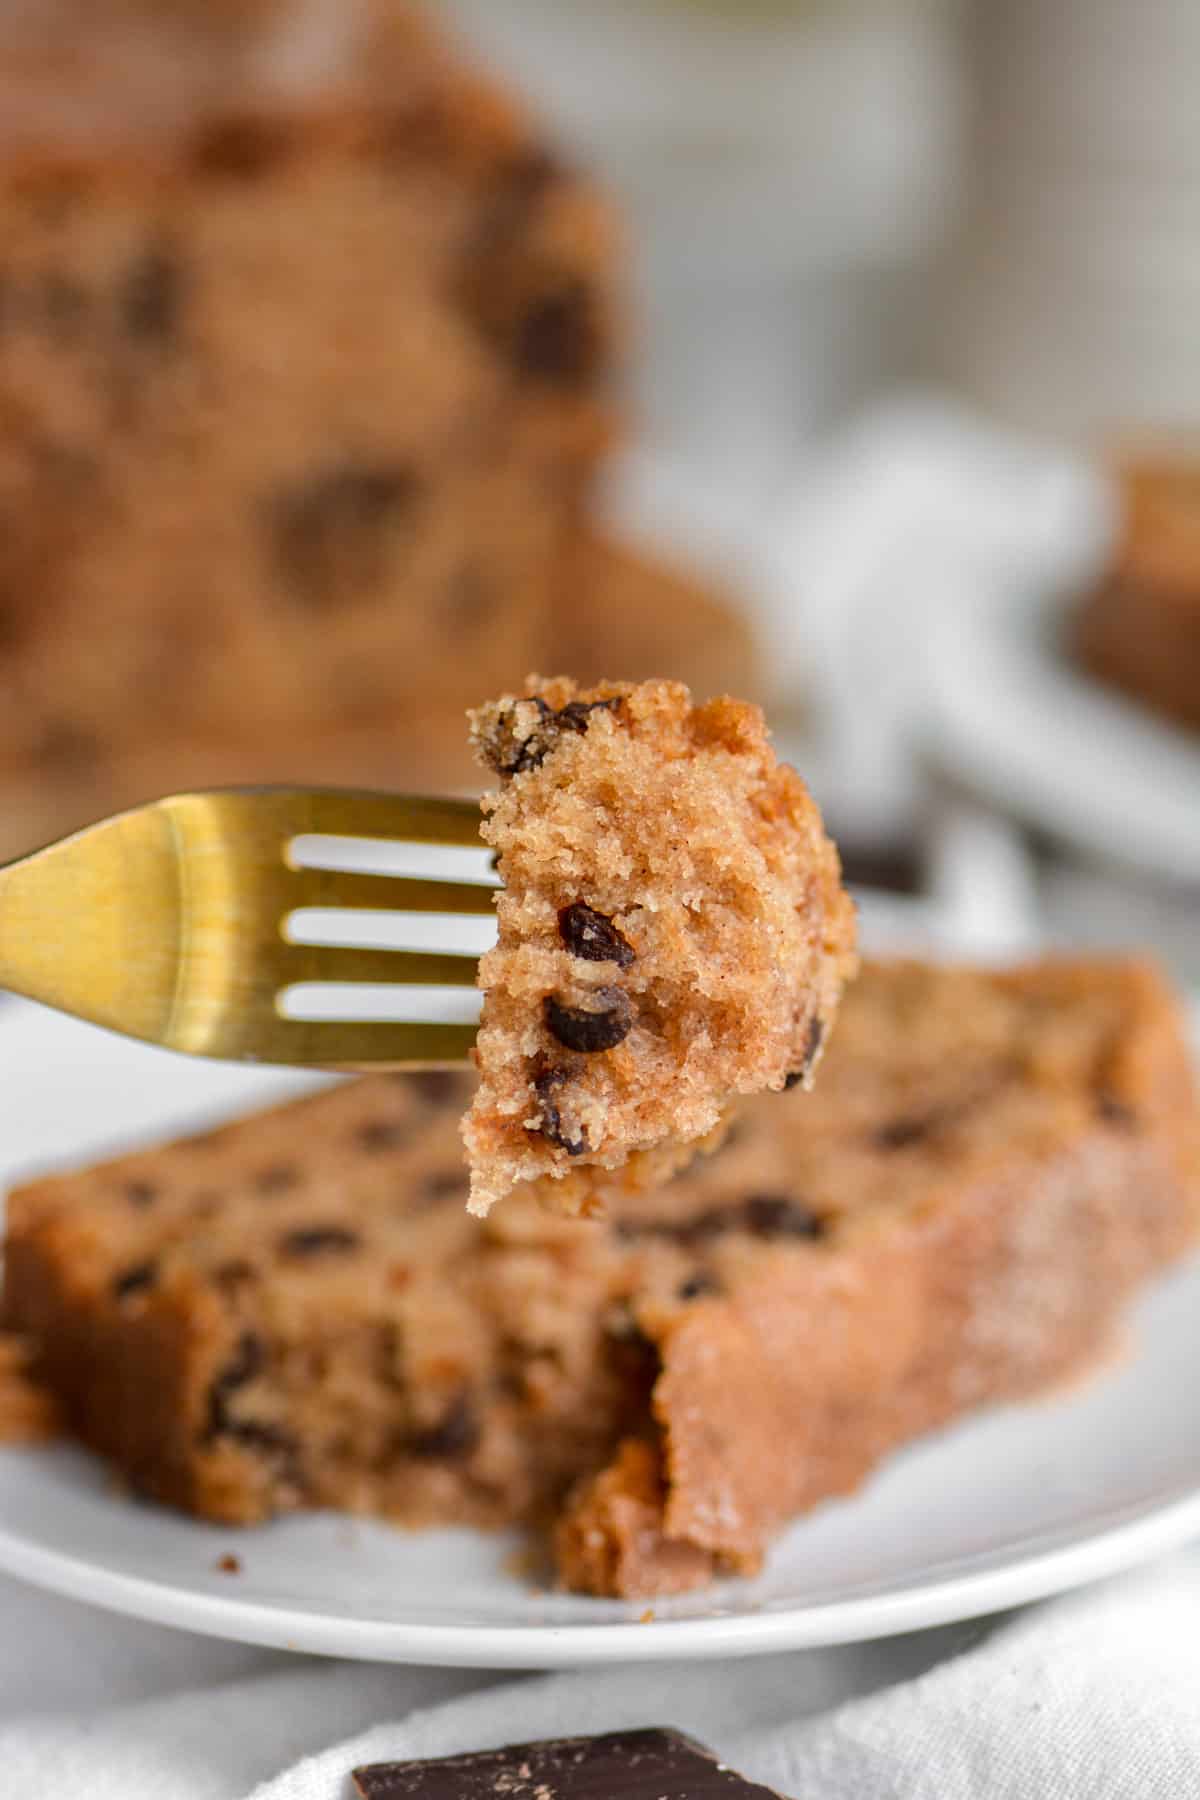 A bite of Vegan Cinnamon Chocolate Chip Bread loaf on a gold fork